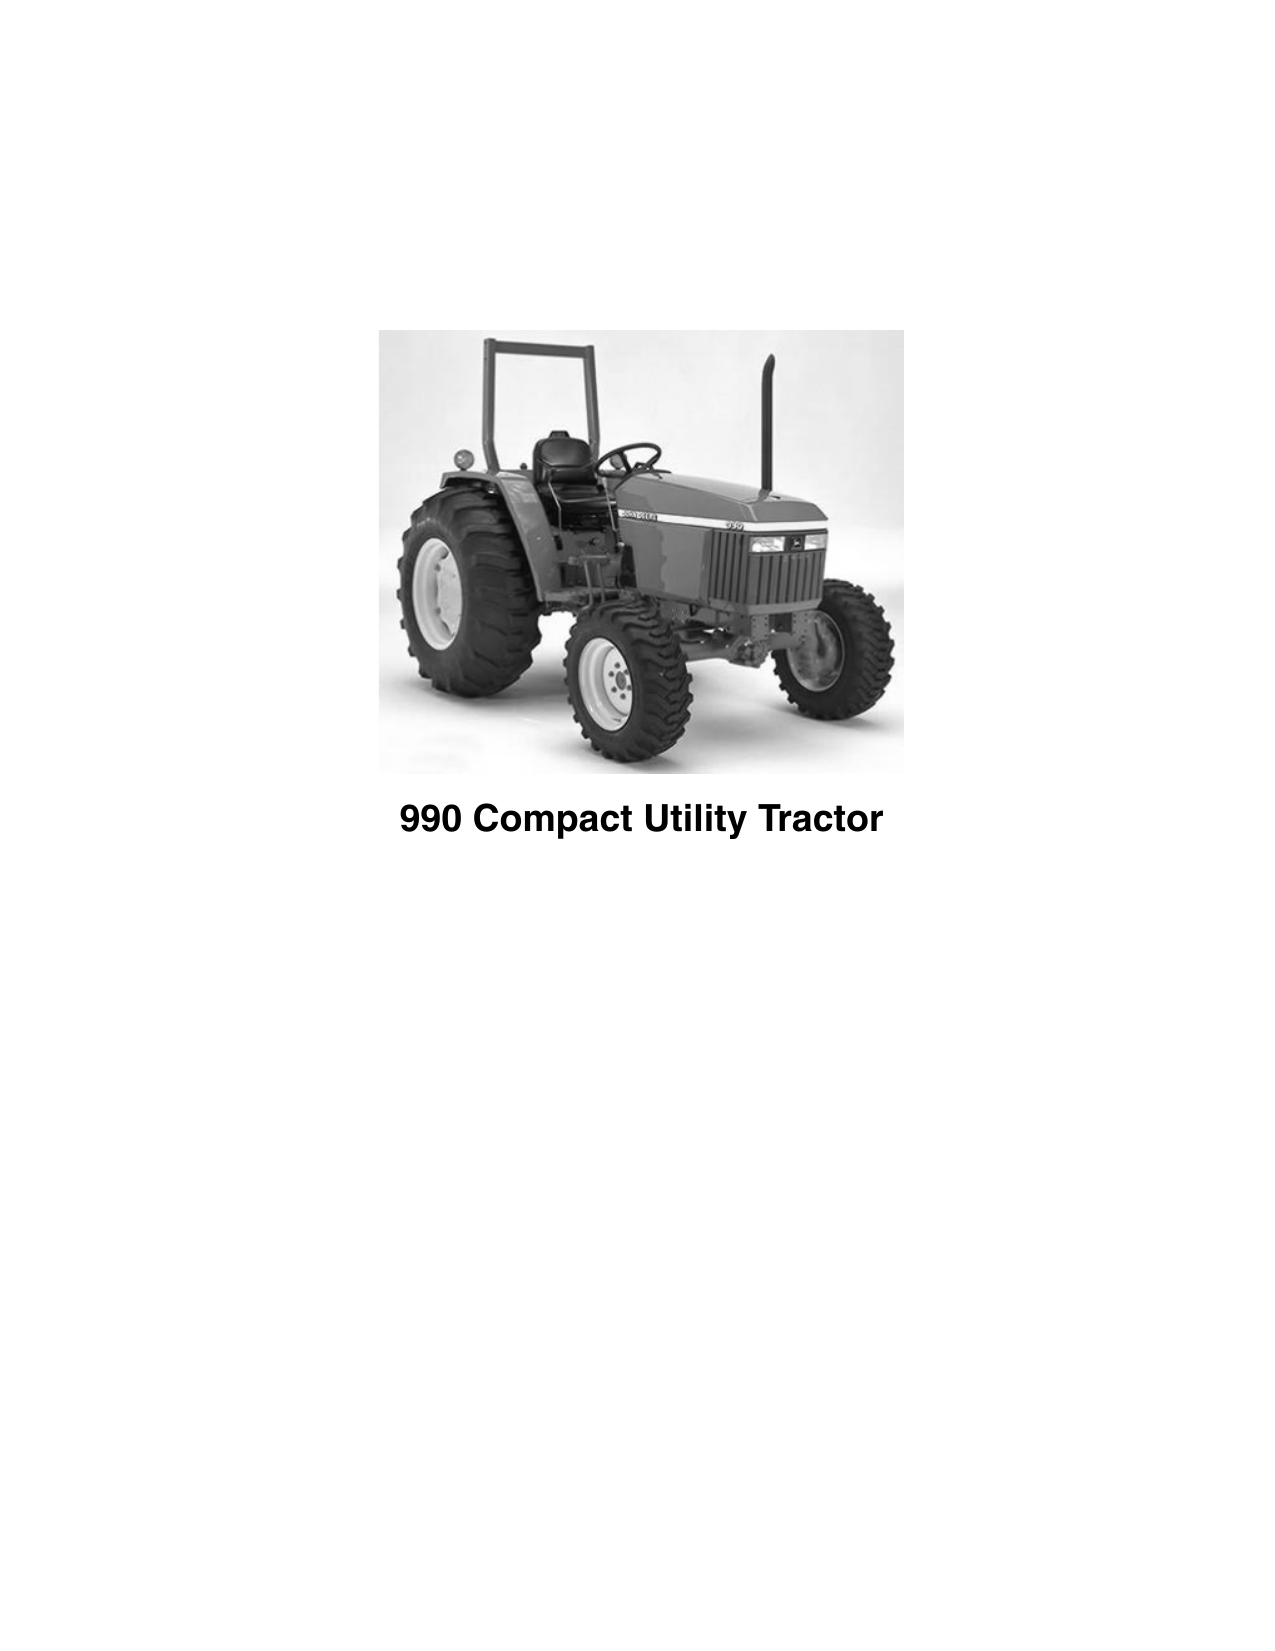 John Deere 990 compact utility tractor technical manual Preview image 2